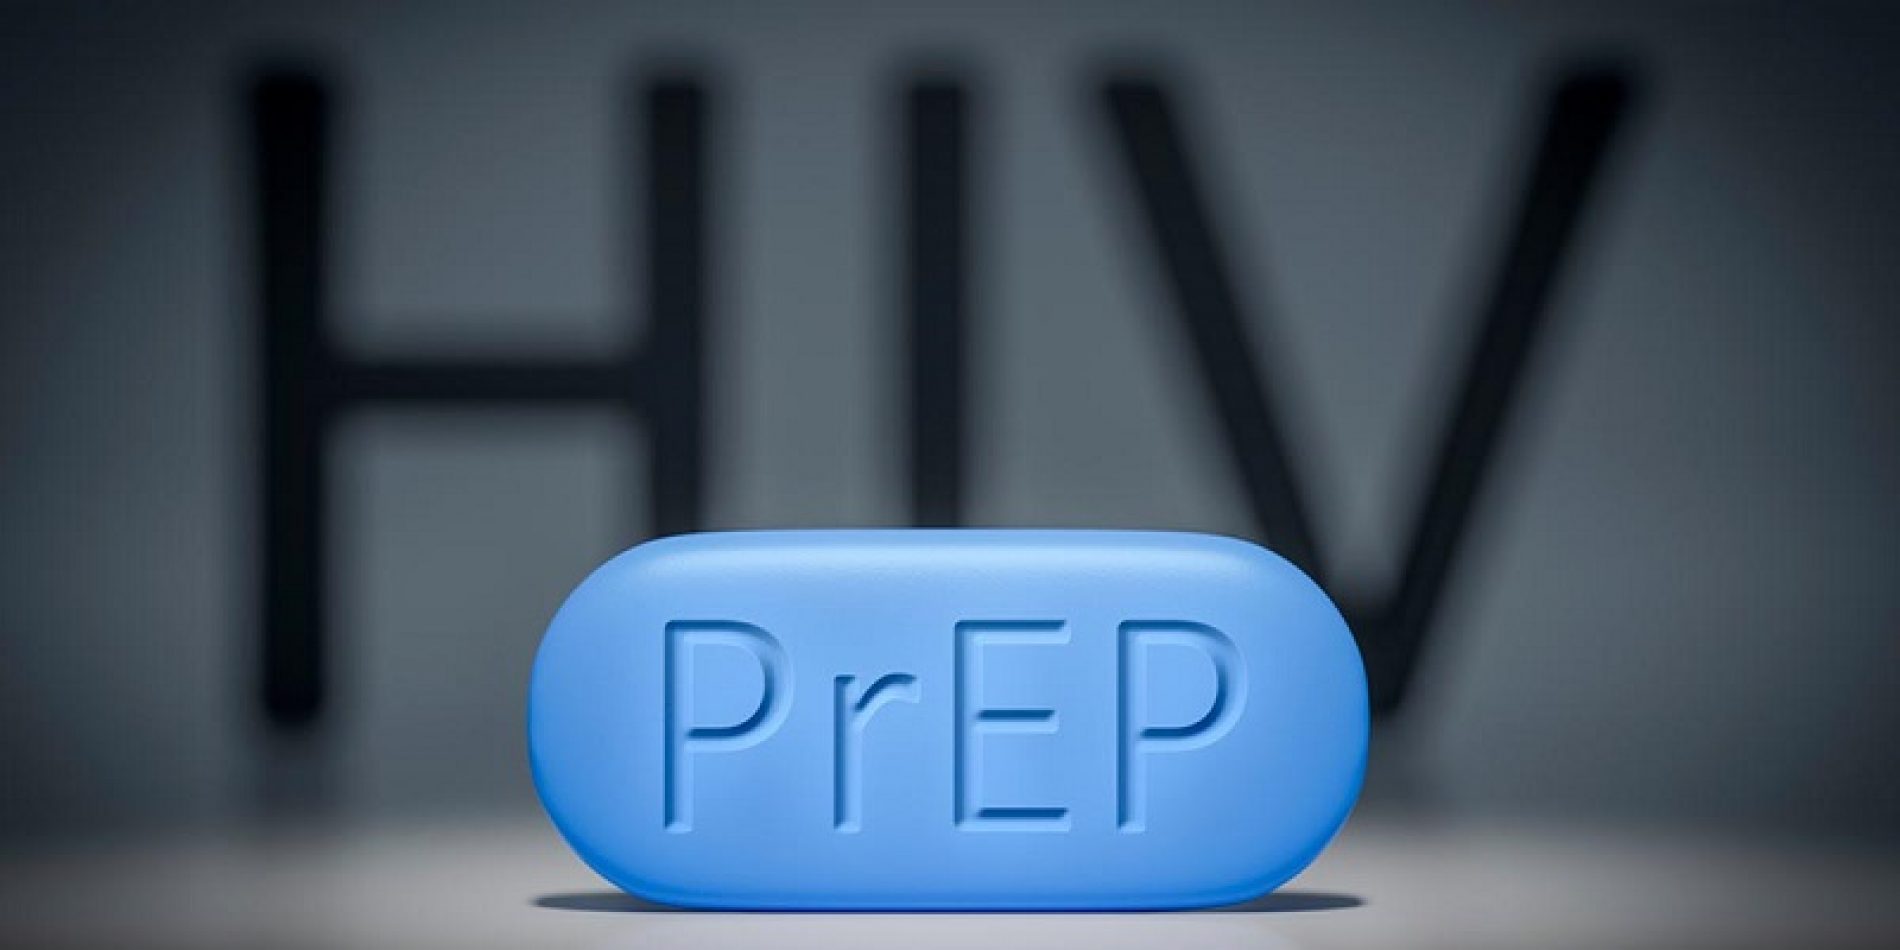 About The Day I Got PrEP-ed